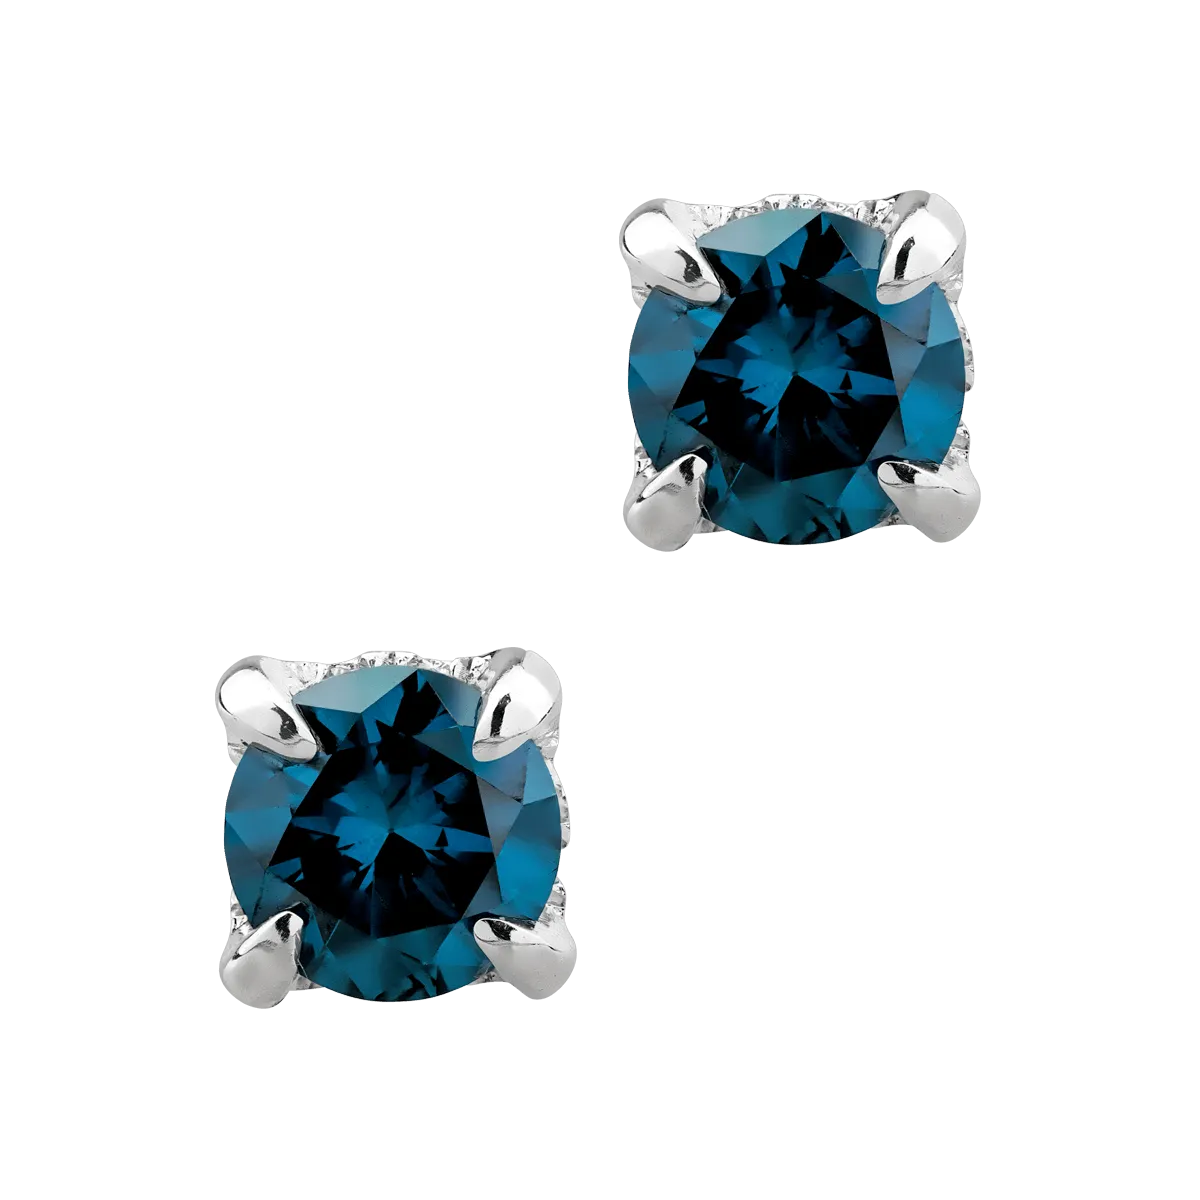 18K white gold earrings with 0.66ct blue diamonds and 0.07ct diamonds